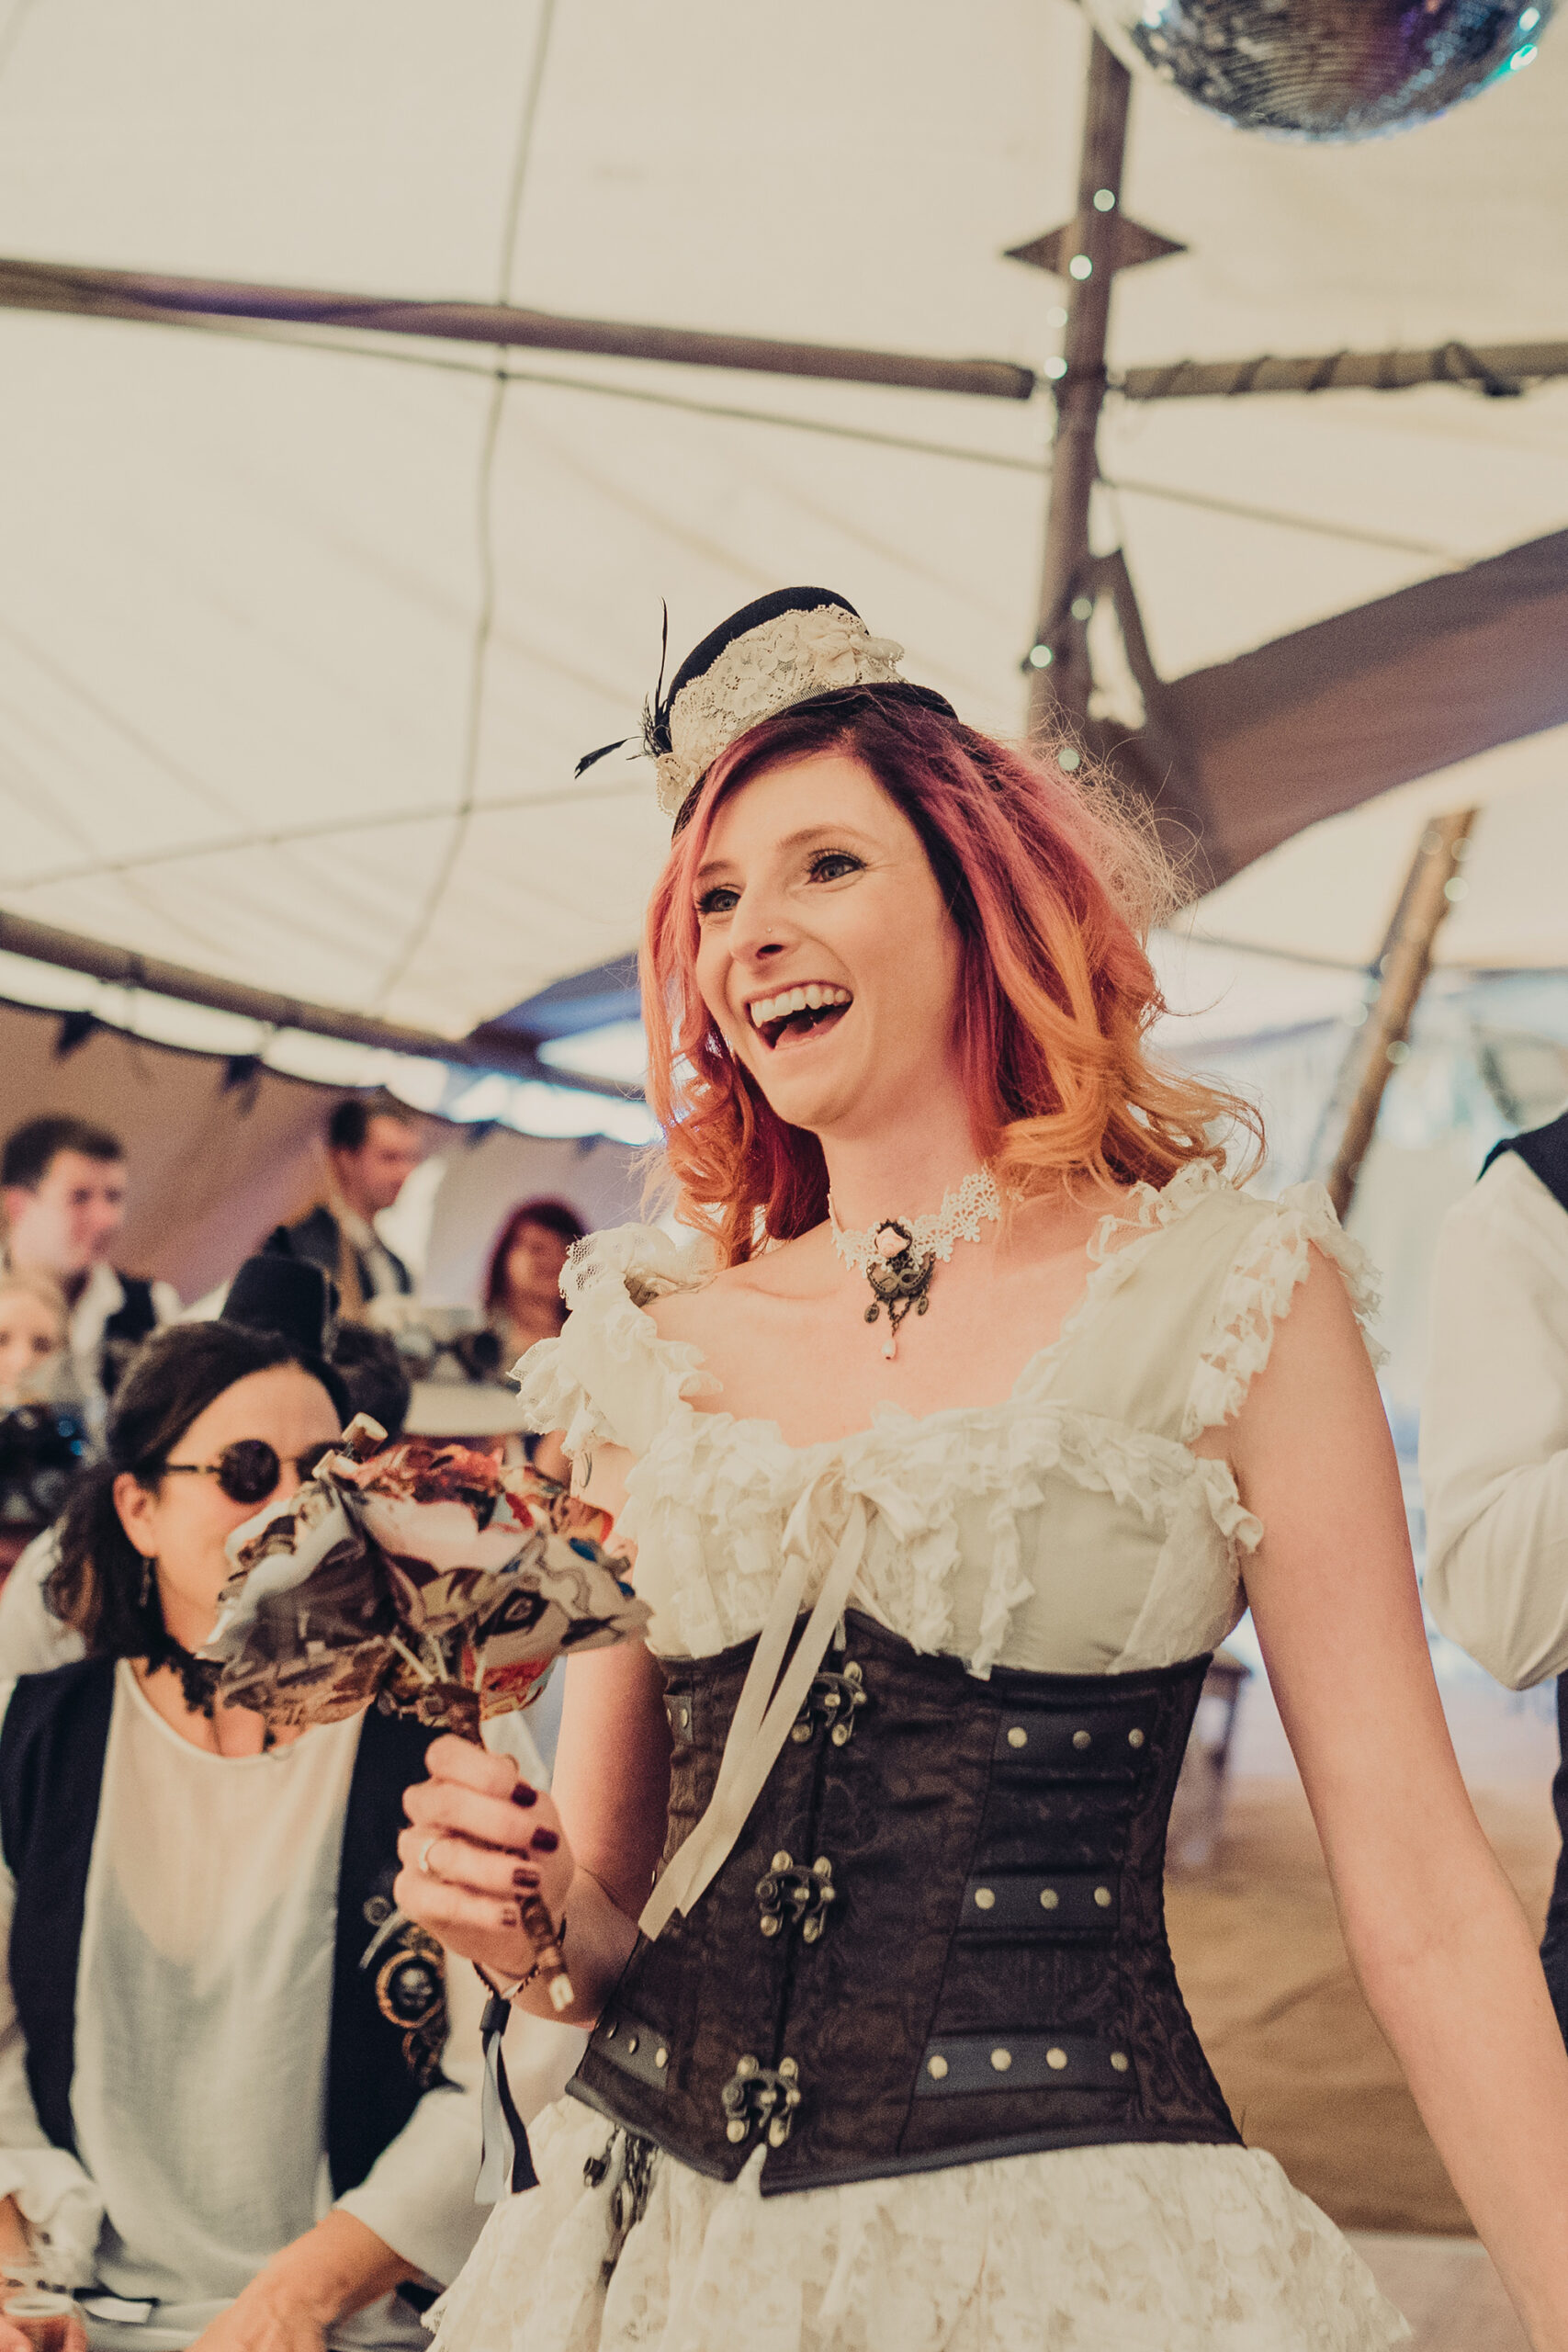 April Rien Steampunk Festival Wedding Chelsea Shoesmith Photography SBS 015 scaled